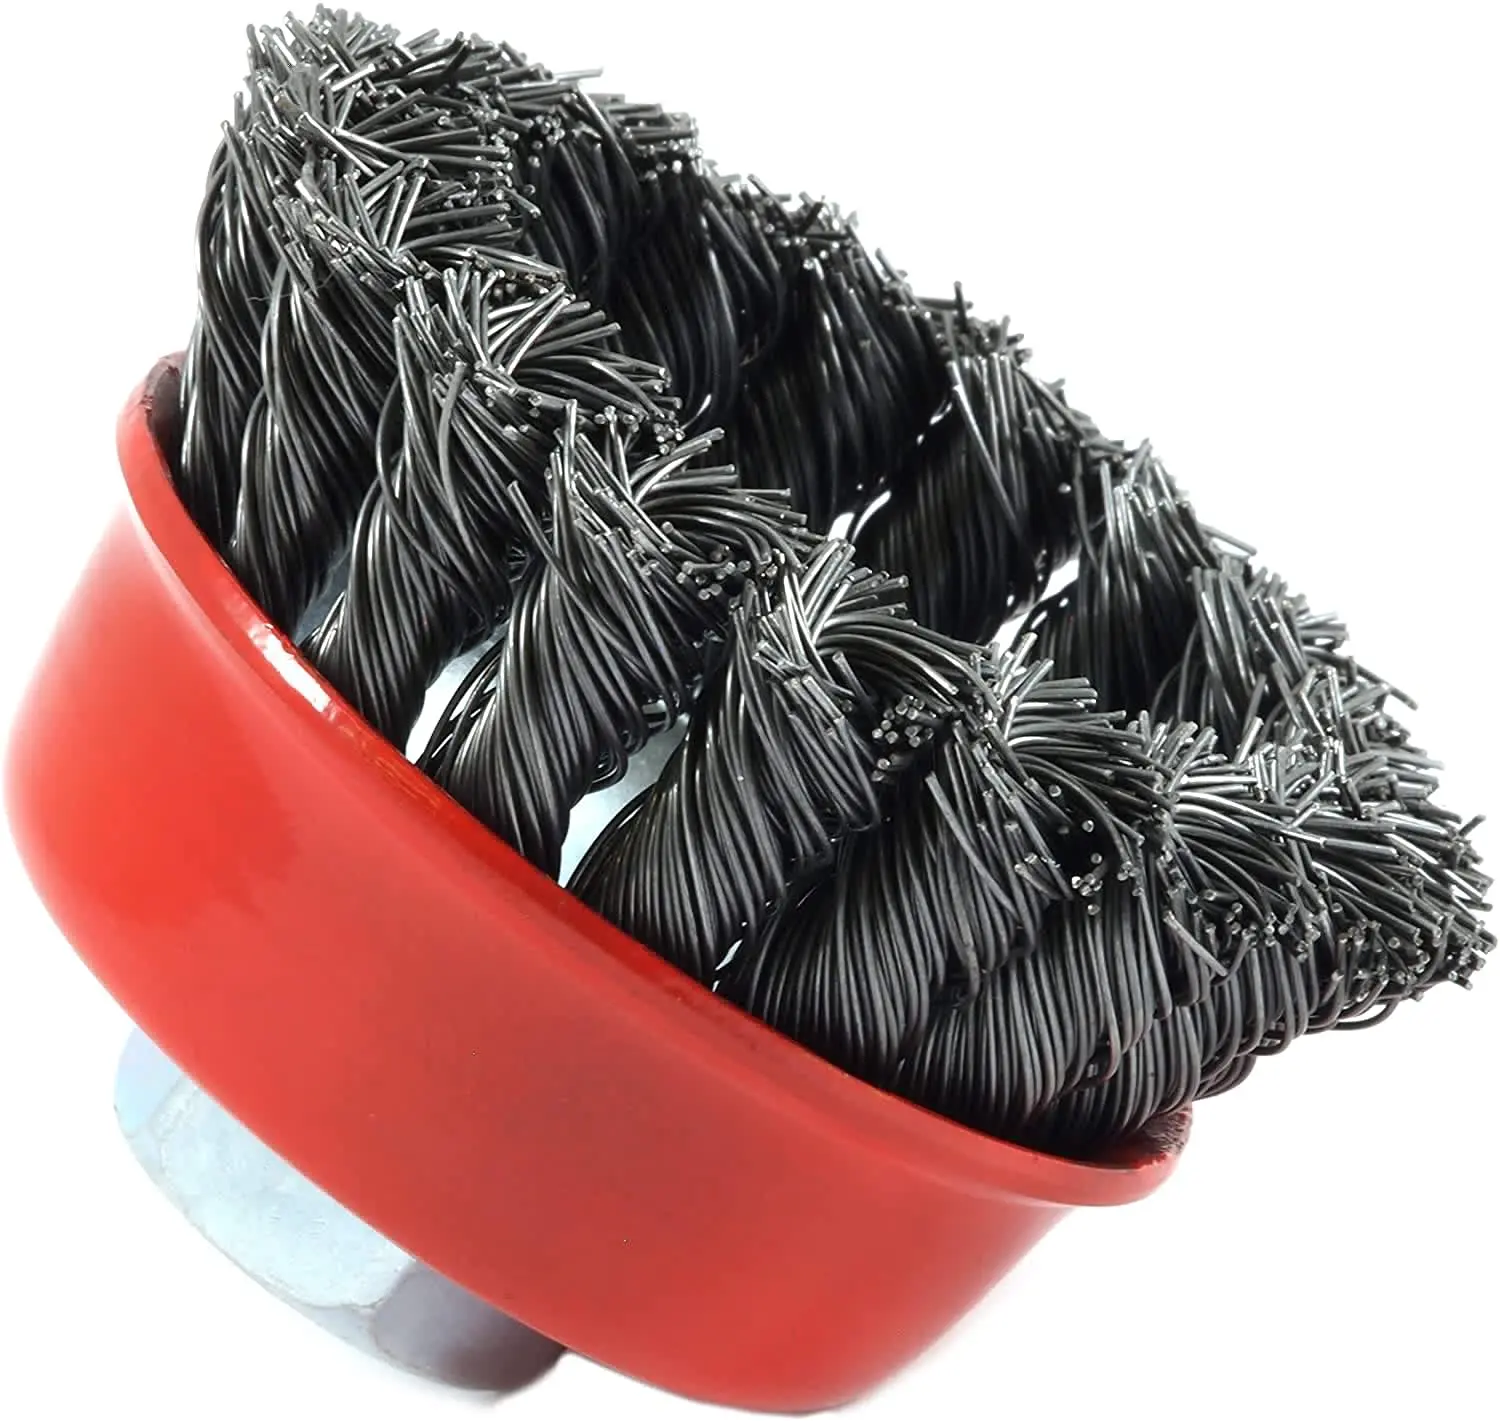 1pc 75mm Screw Twist Knot Wire Wheel Cup Brush For Angle Grinder Steel Wire & Alloy Metals Twisted & Crimped Wire Br